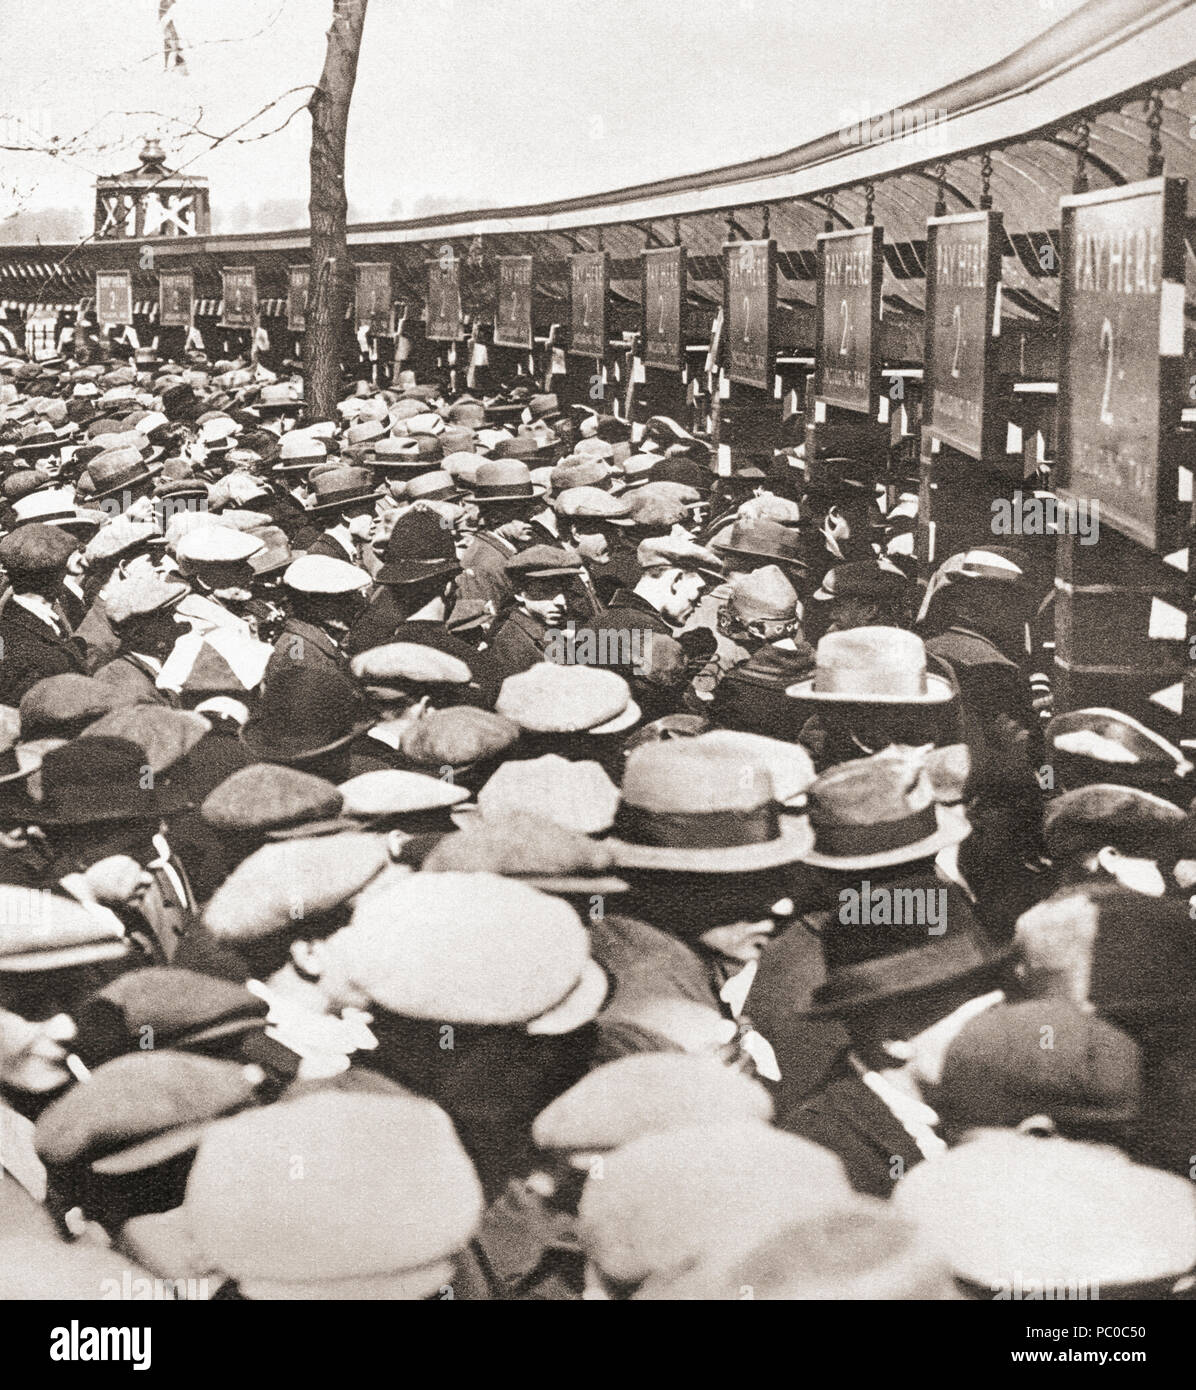 Crowds of people trying to get into Wembley Stadium for the first ever FA Cup Final in 1923 between Bolton Wanderers and West Ham United.  A crowd of around 300,000 got into the stadium which had a capacity of 125,000, many of them had to be cleared off the pitch by a policeman mounted on a white horse, the match is often referred to as the 'White Horse Final'.  From These Tremendous Years, published 1938. Stock Photo